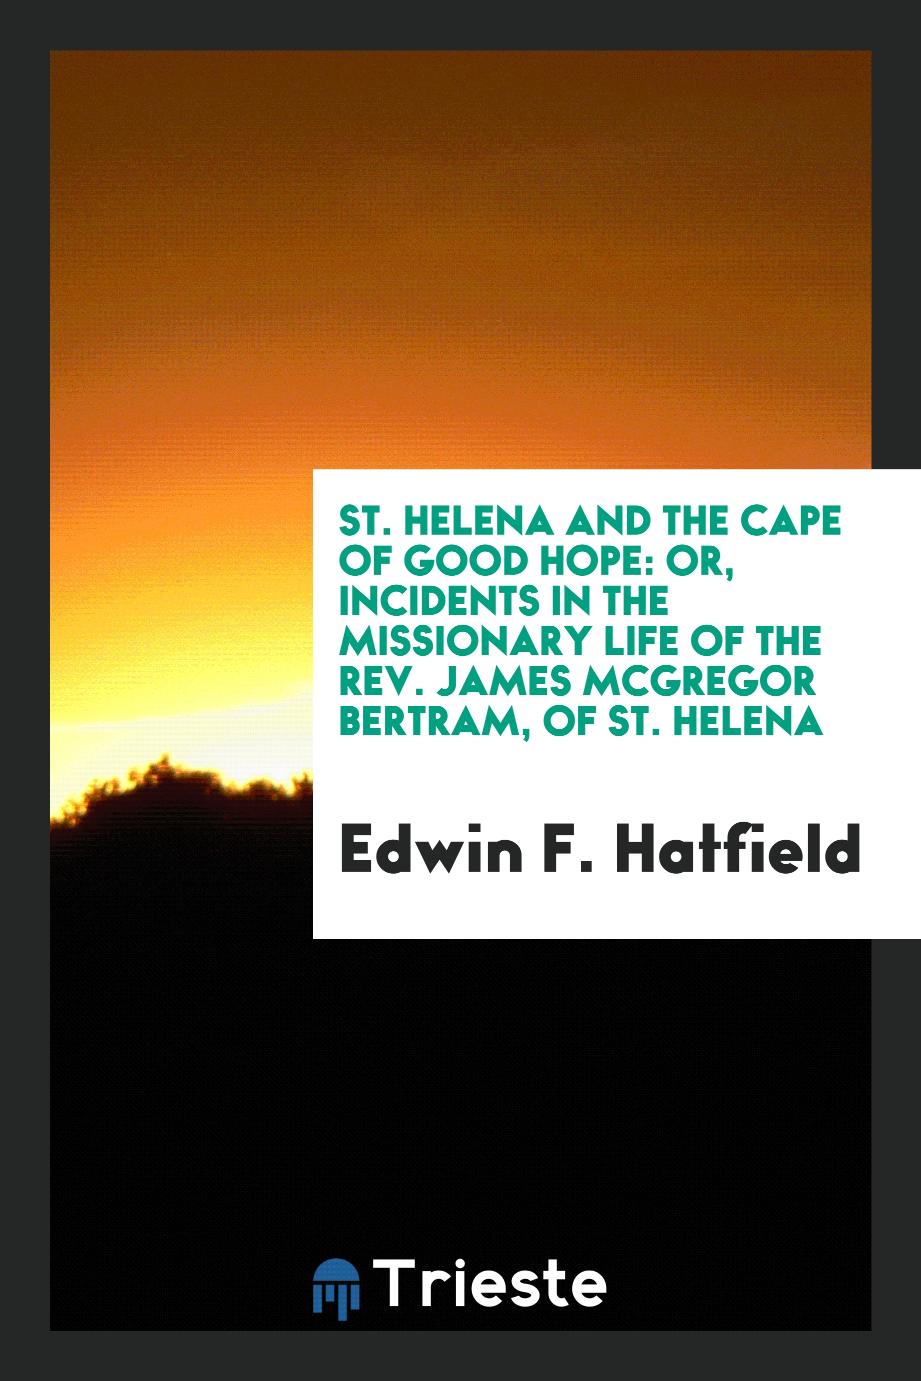 St. Helena and the Cape of Good Hope: Or, Incidents in the Missionary Life of the Rev. James McGregor Bertram, of St. Helena